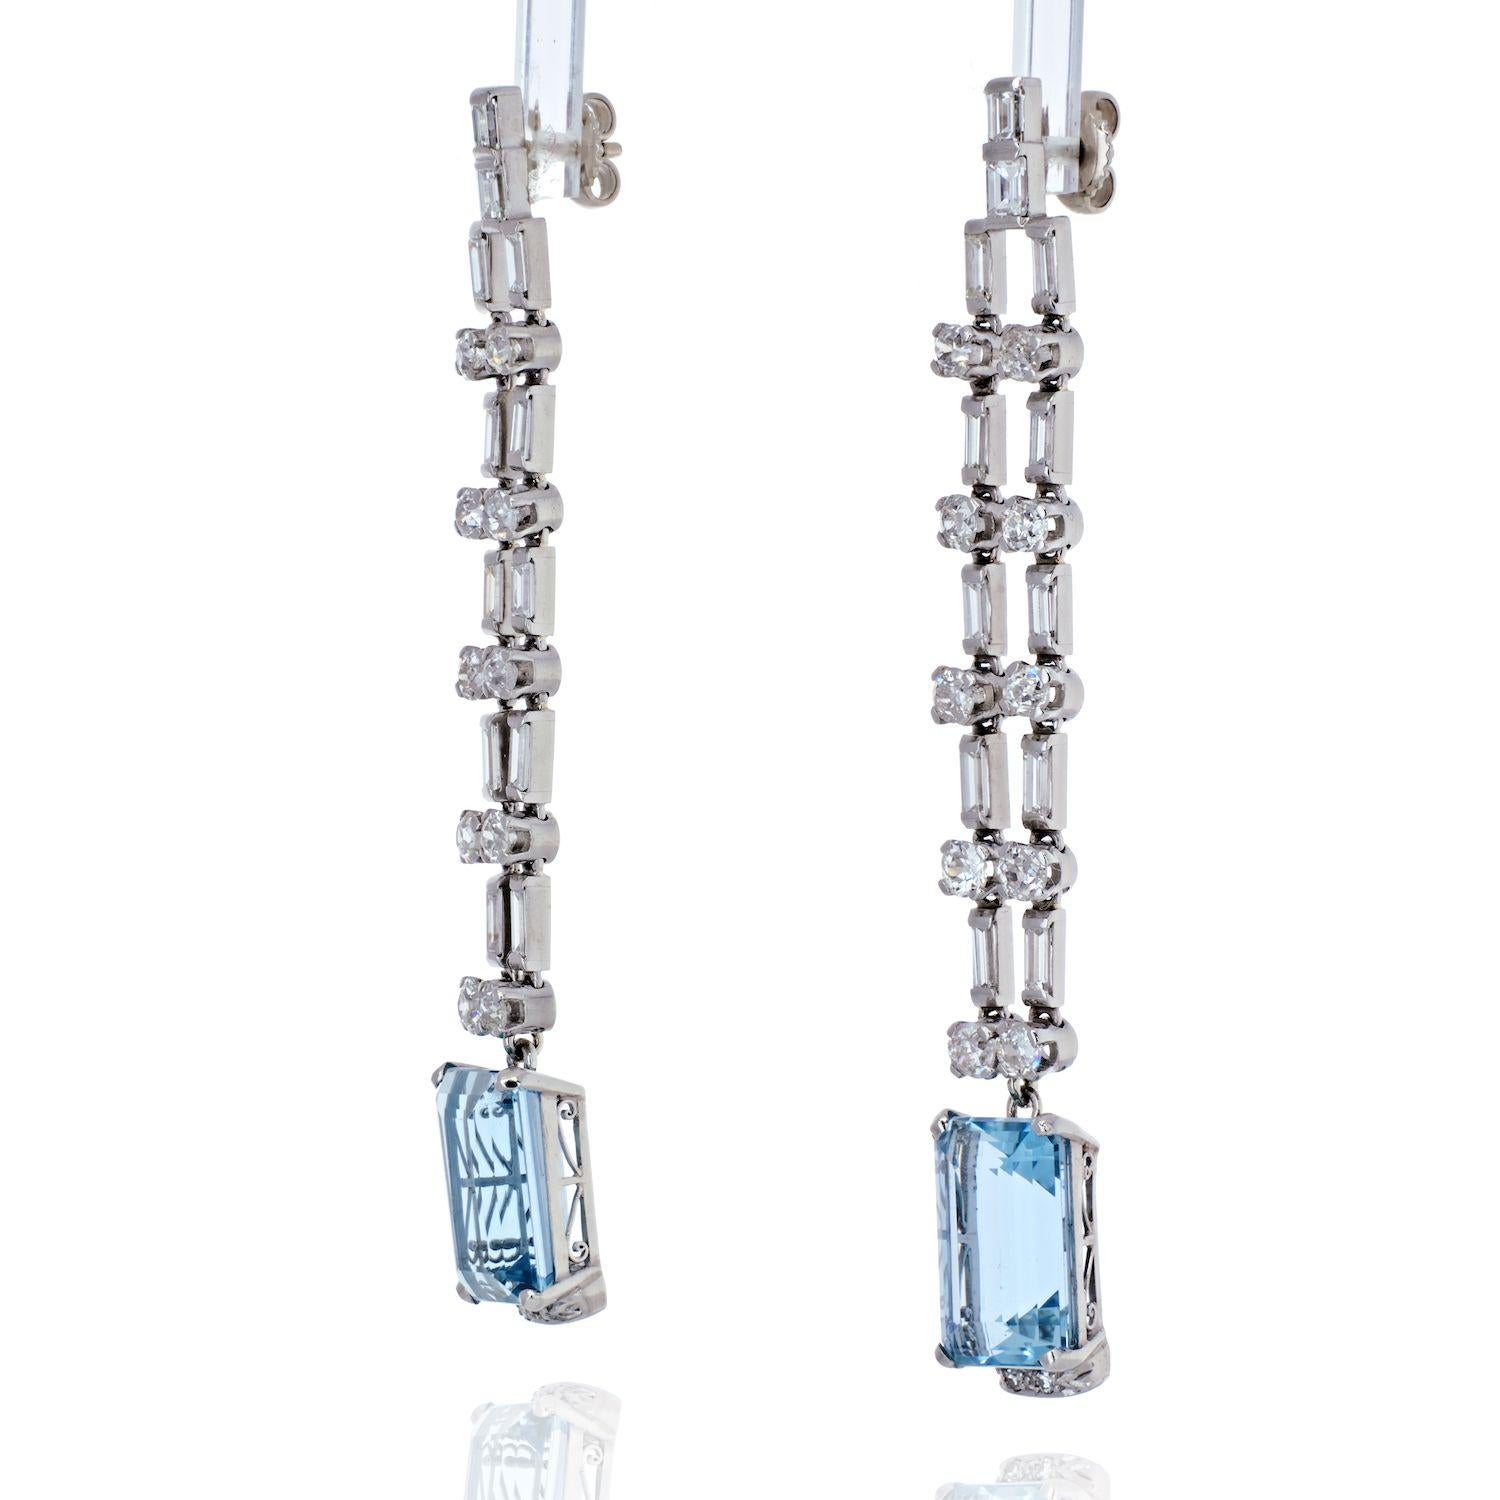 Elegant and romantic these platinum diamond and aquamarine cascade dangling fine earrings will make a beautiful addition to any outfit. Delicate baguette and brilliant cut diamonds complement the soft color of the aquamarines making these stylish